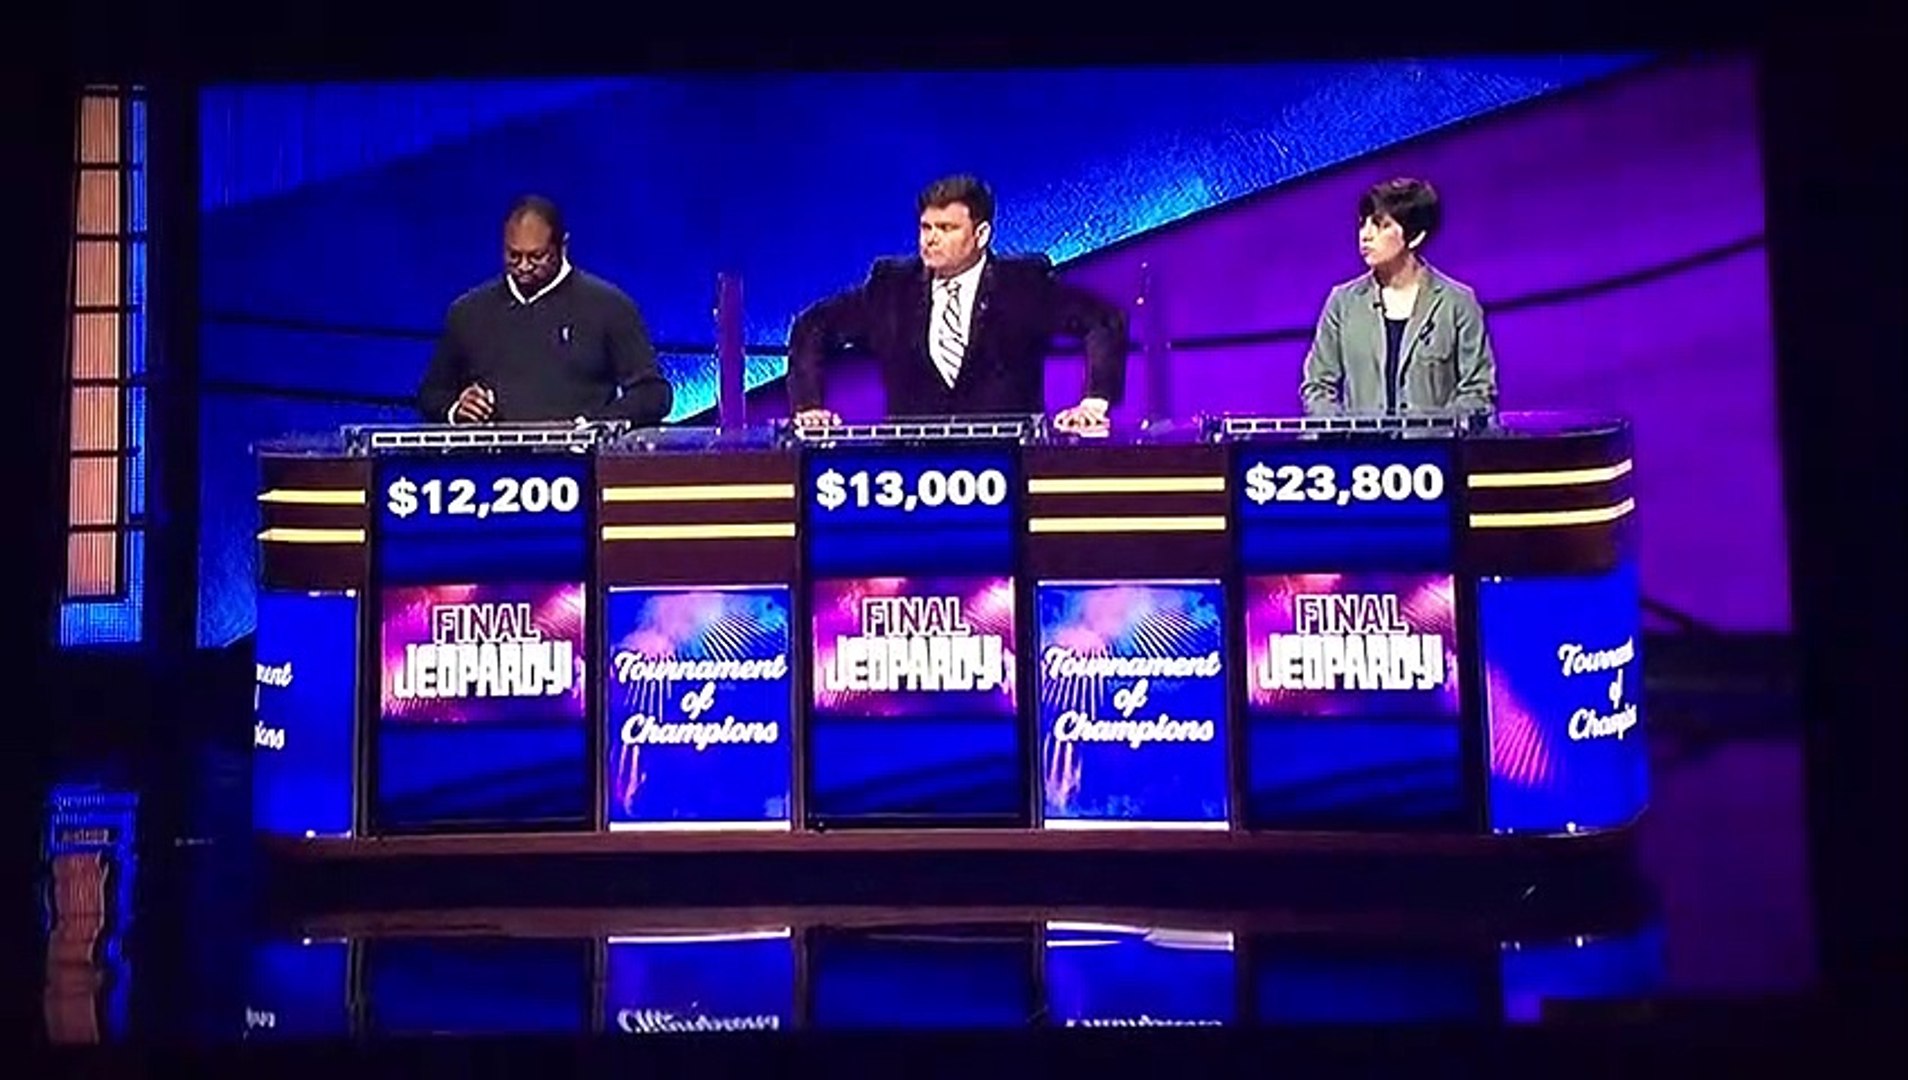 Anime Jeopardy Tournament Of Champions 2007 Finals by